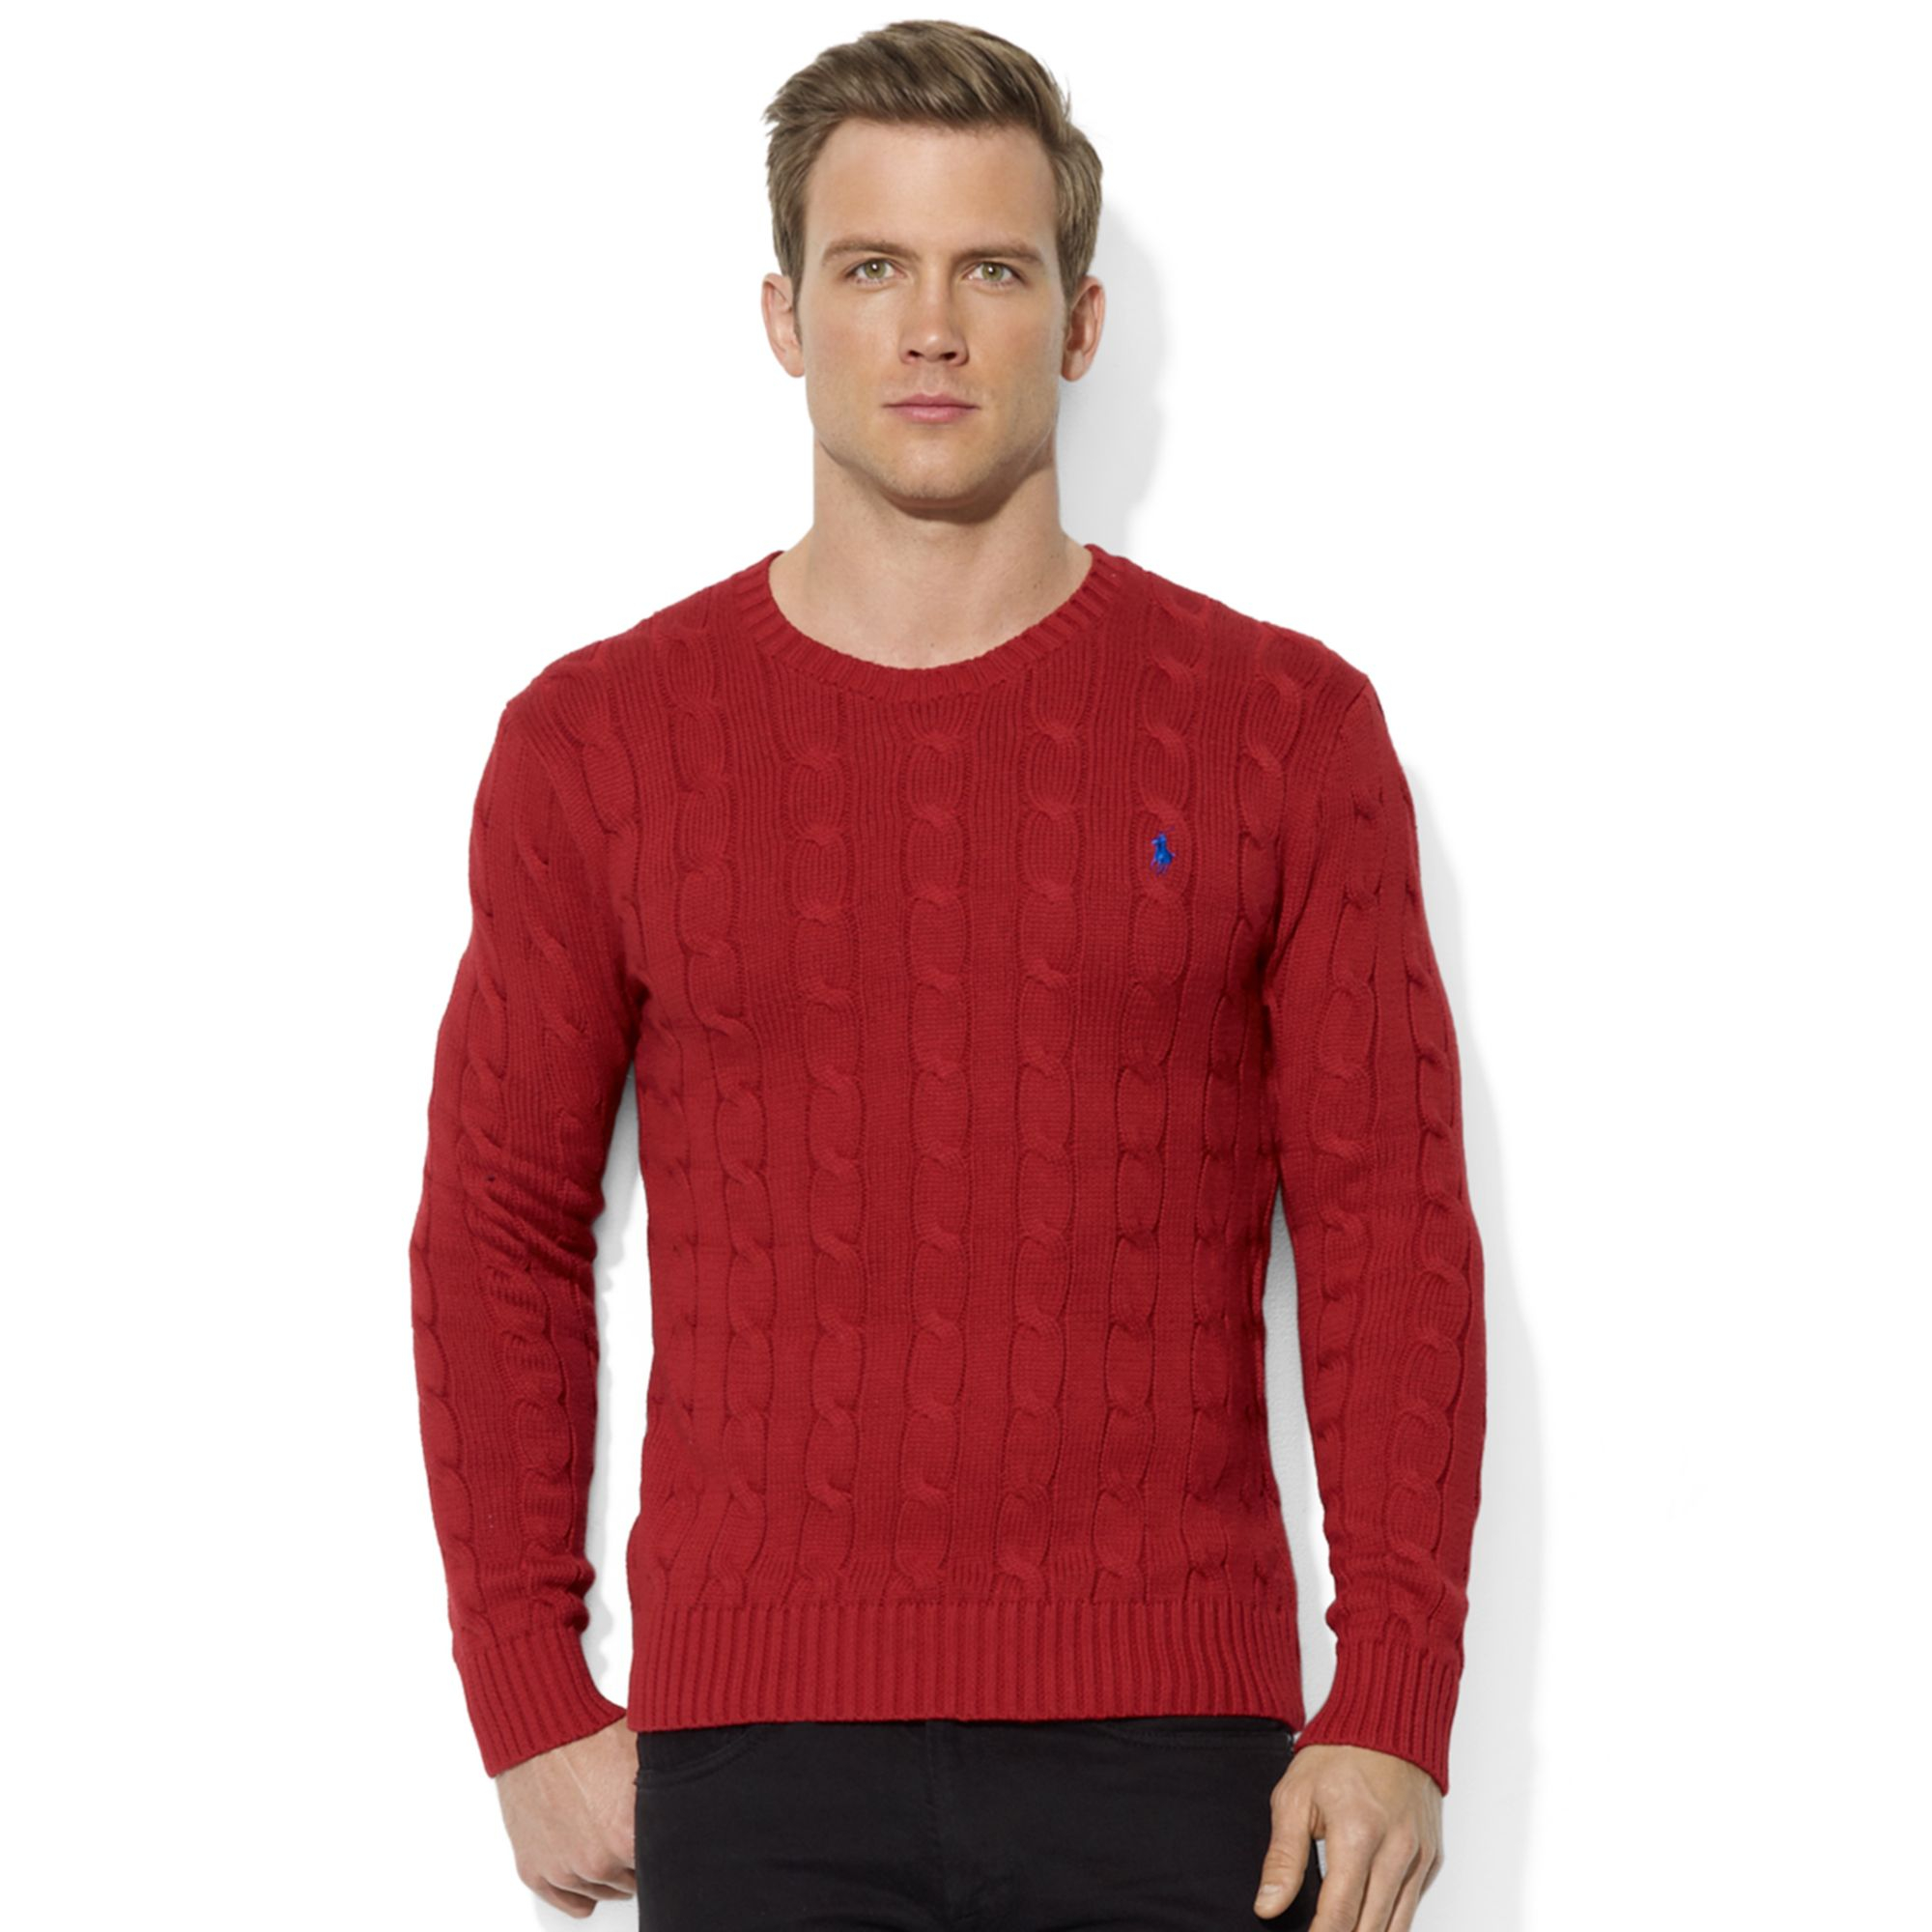 Lyst - Ralph lauren Roving Crew Neck Cable Cotton Sweater in Red for Men